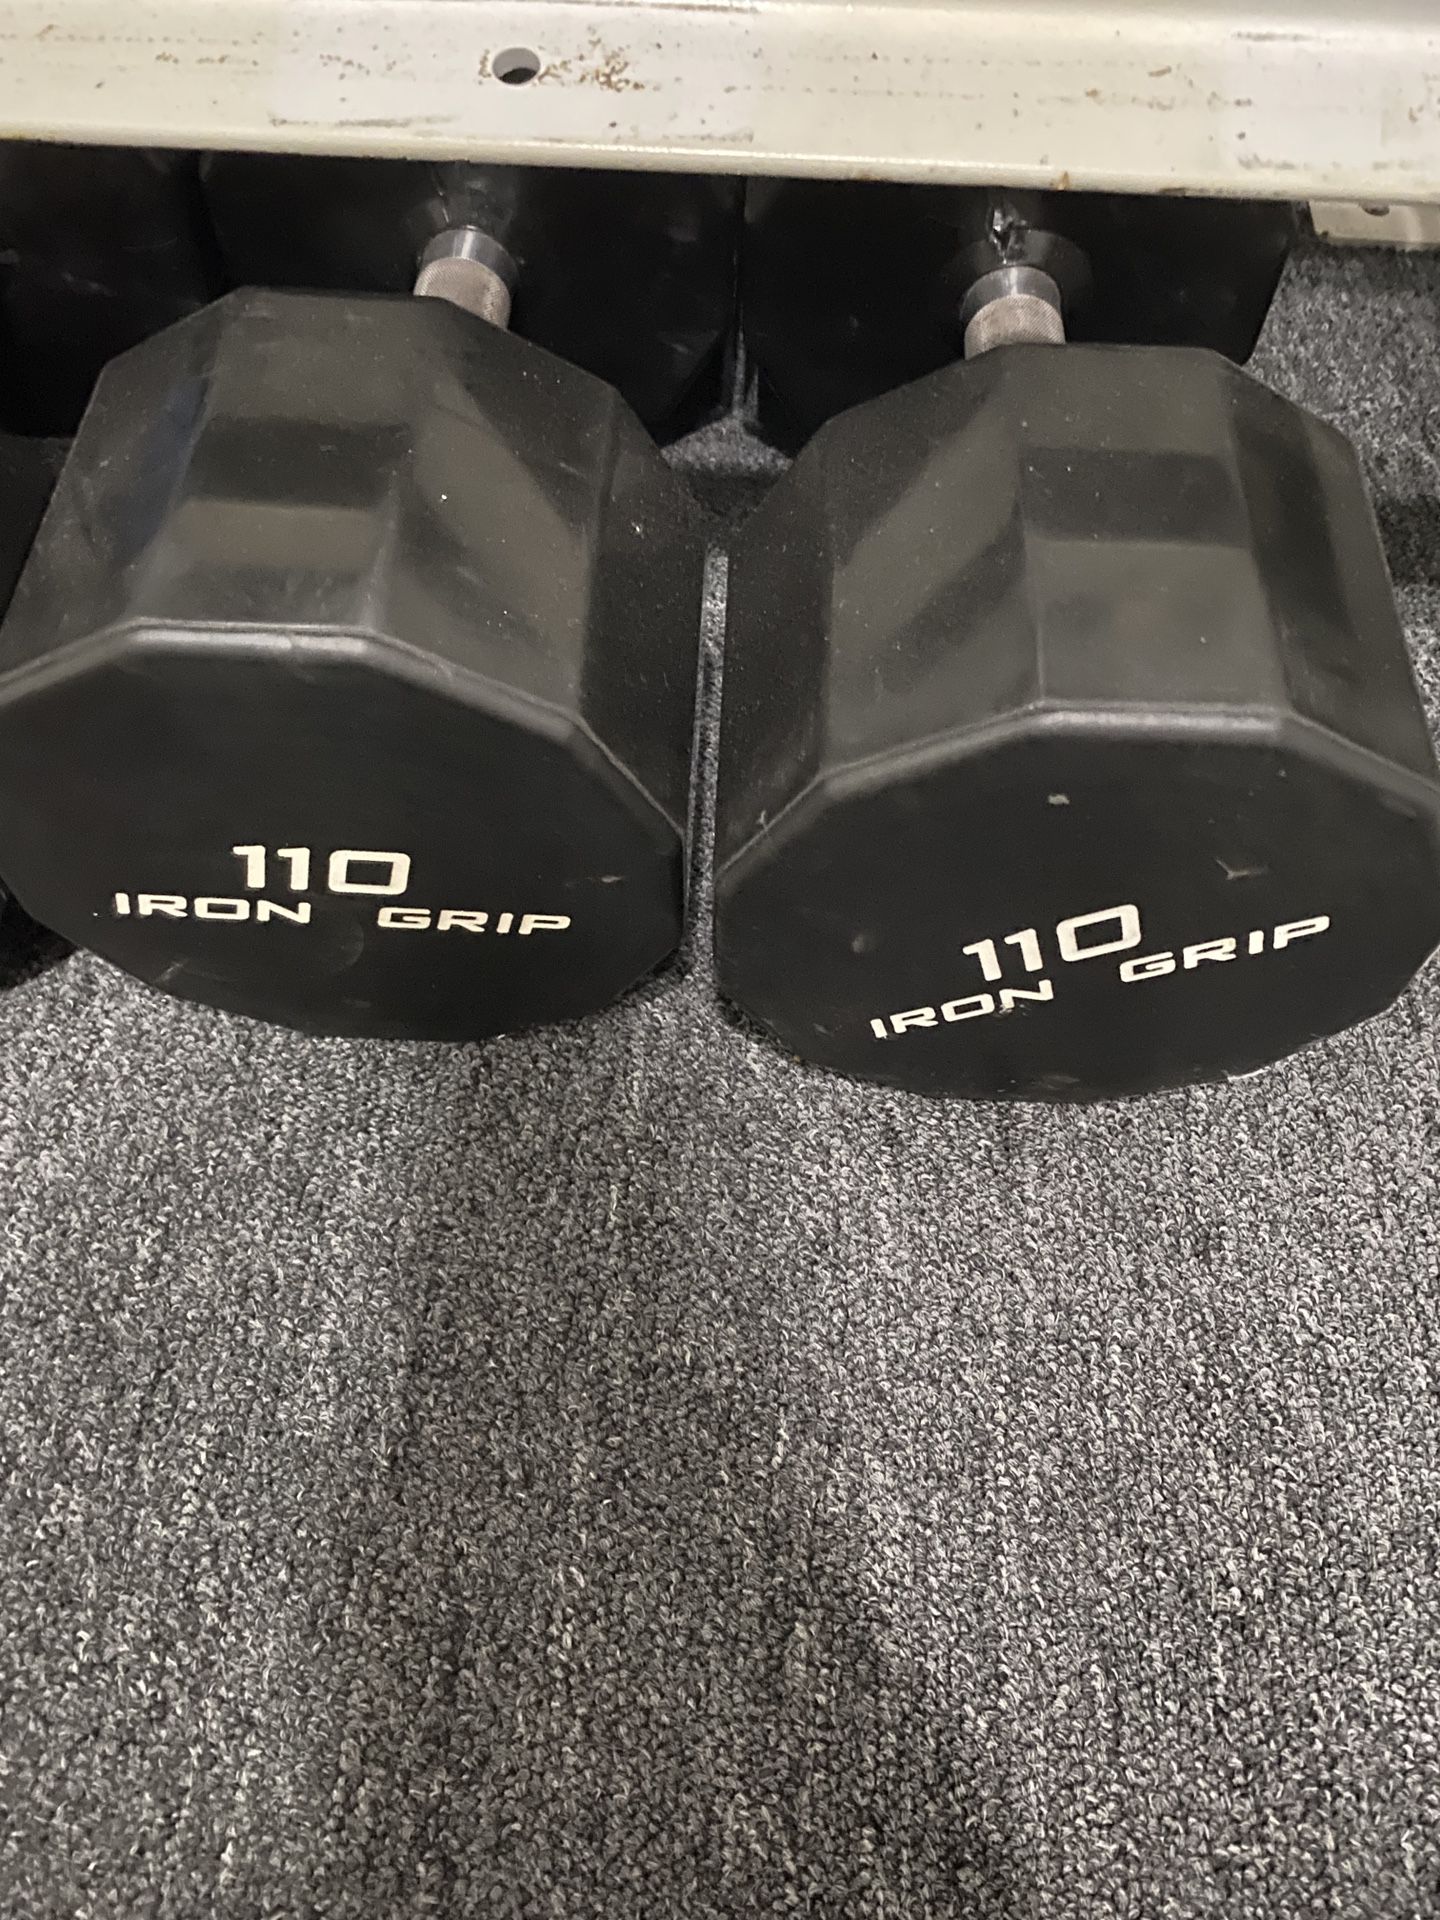 110 Iron Grip Dumbells for Sale in Miami, FL - OfferUp